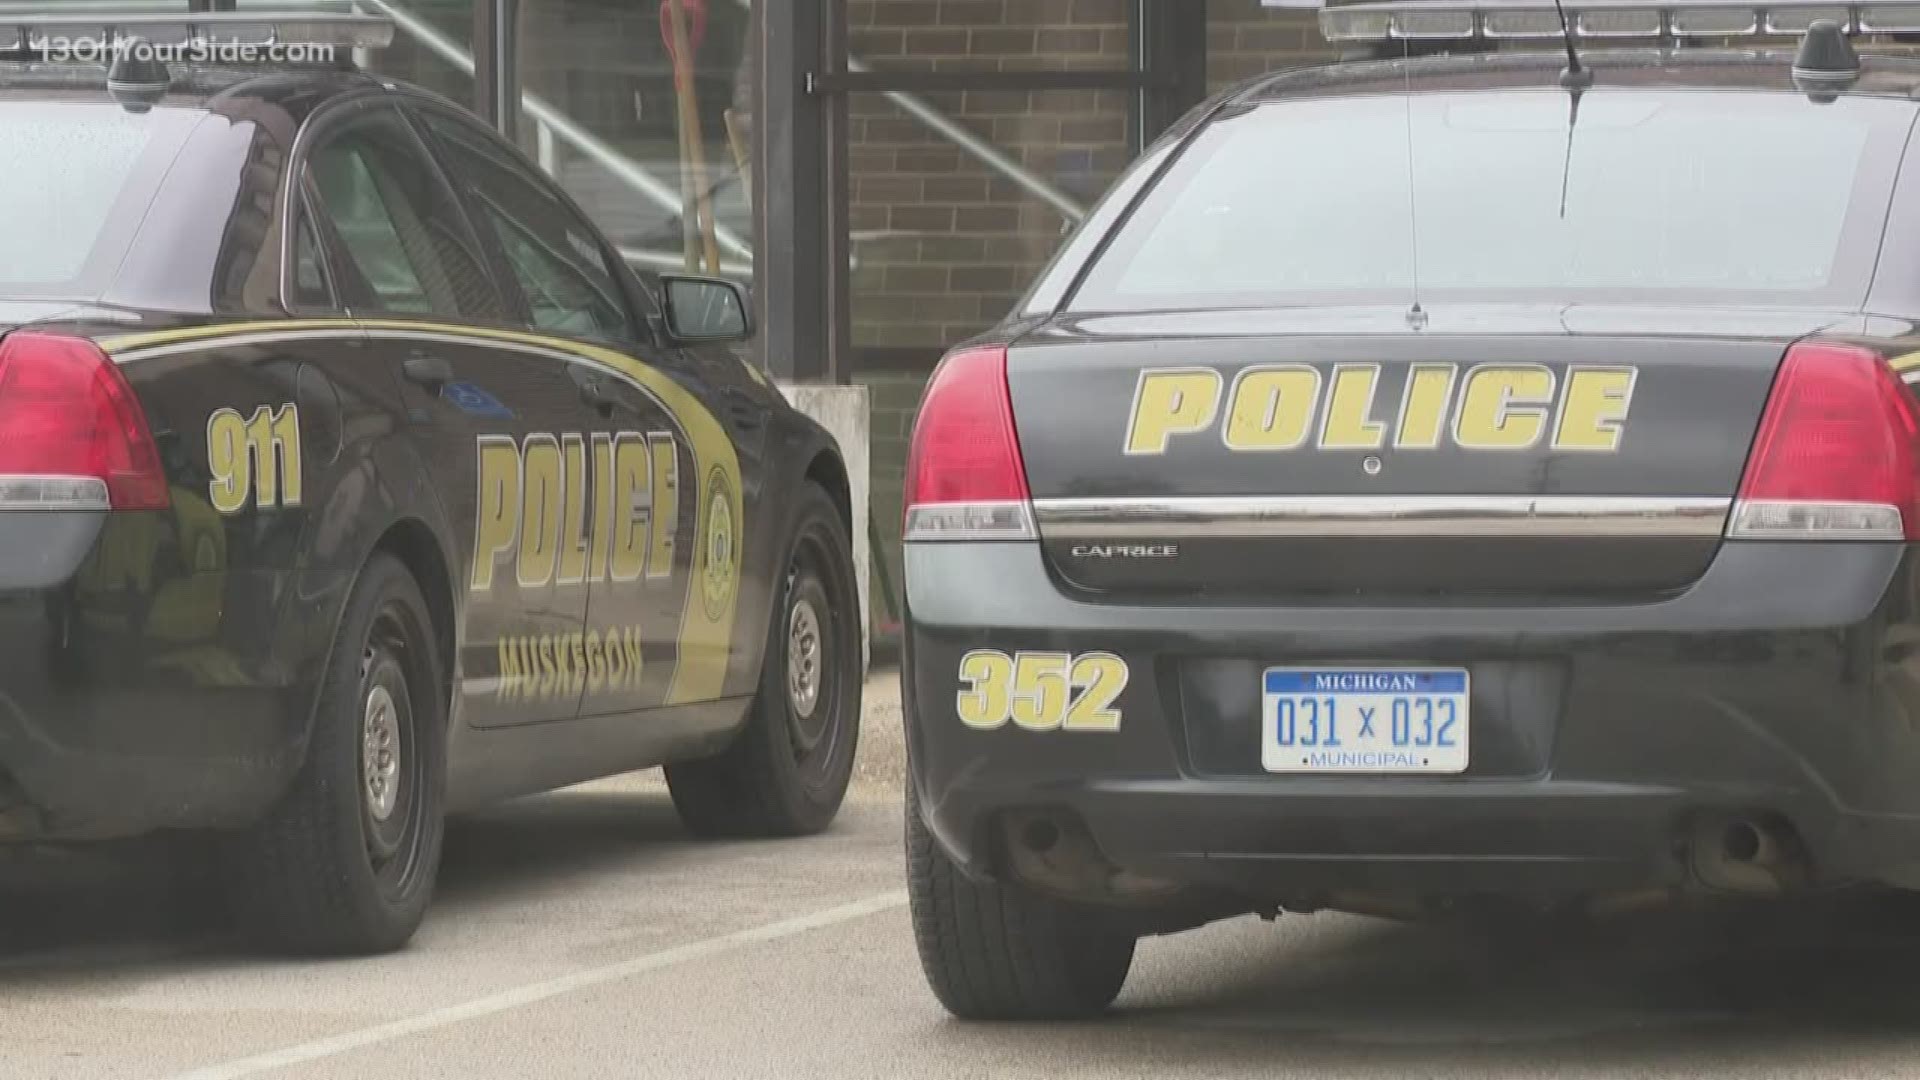 Muskegon Police are asking residents to remove valuibles and keep vehicles locked.